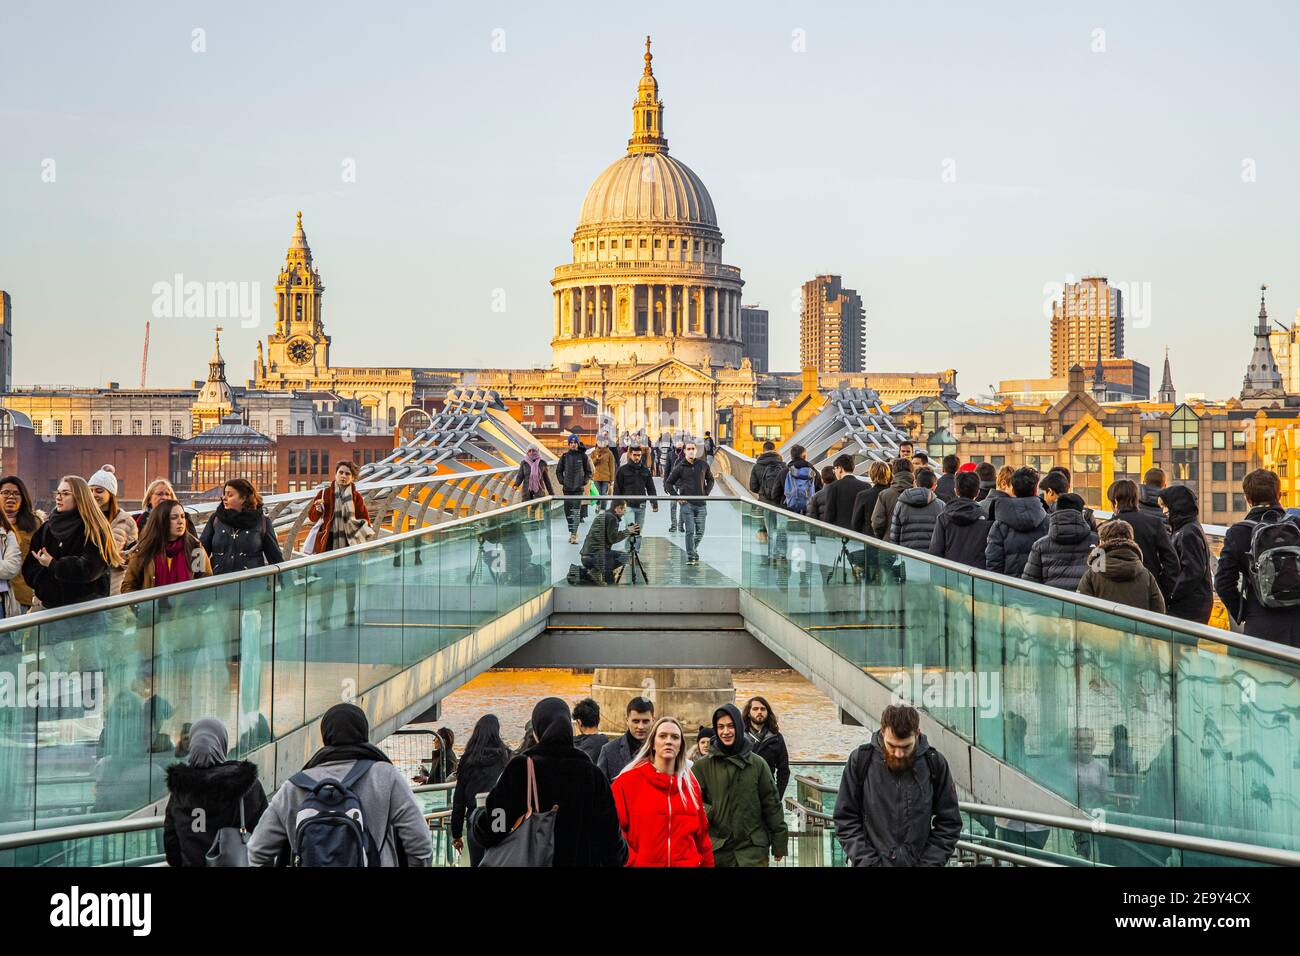 Crowds of people crossing the London Millennium Footbridge with Saint Paul's Cathedral in the background Stock Photo